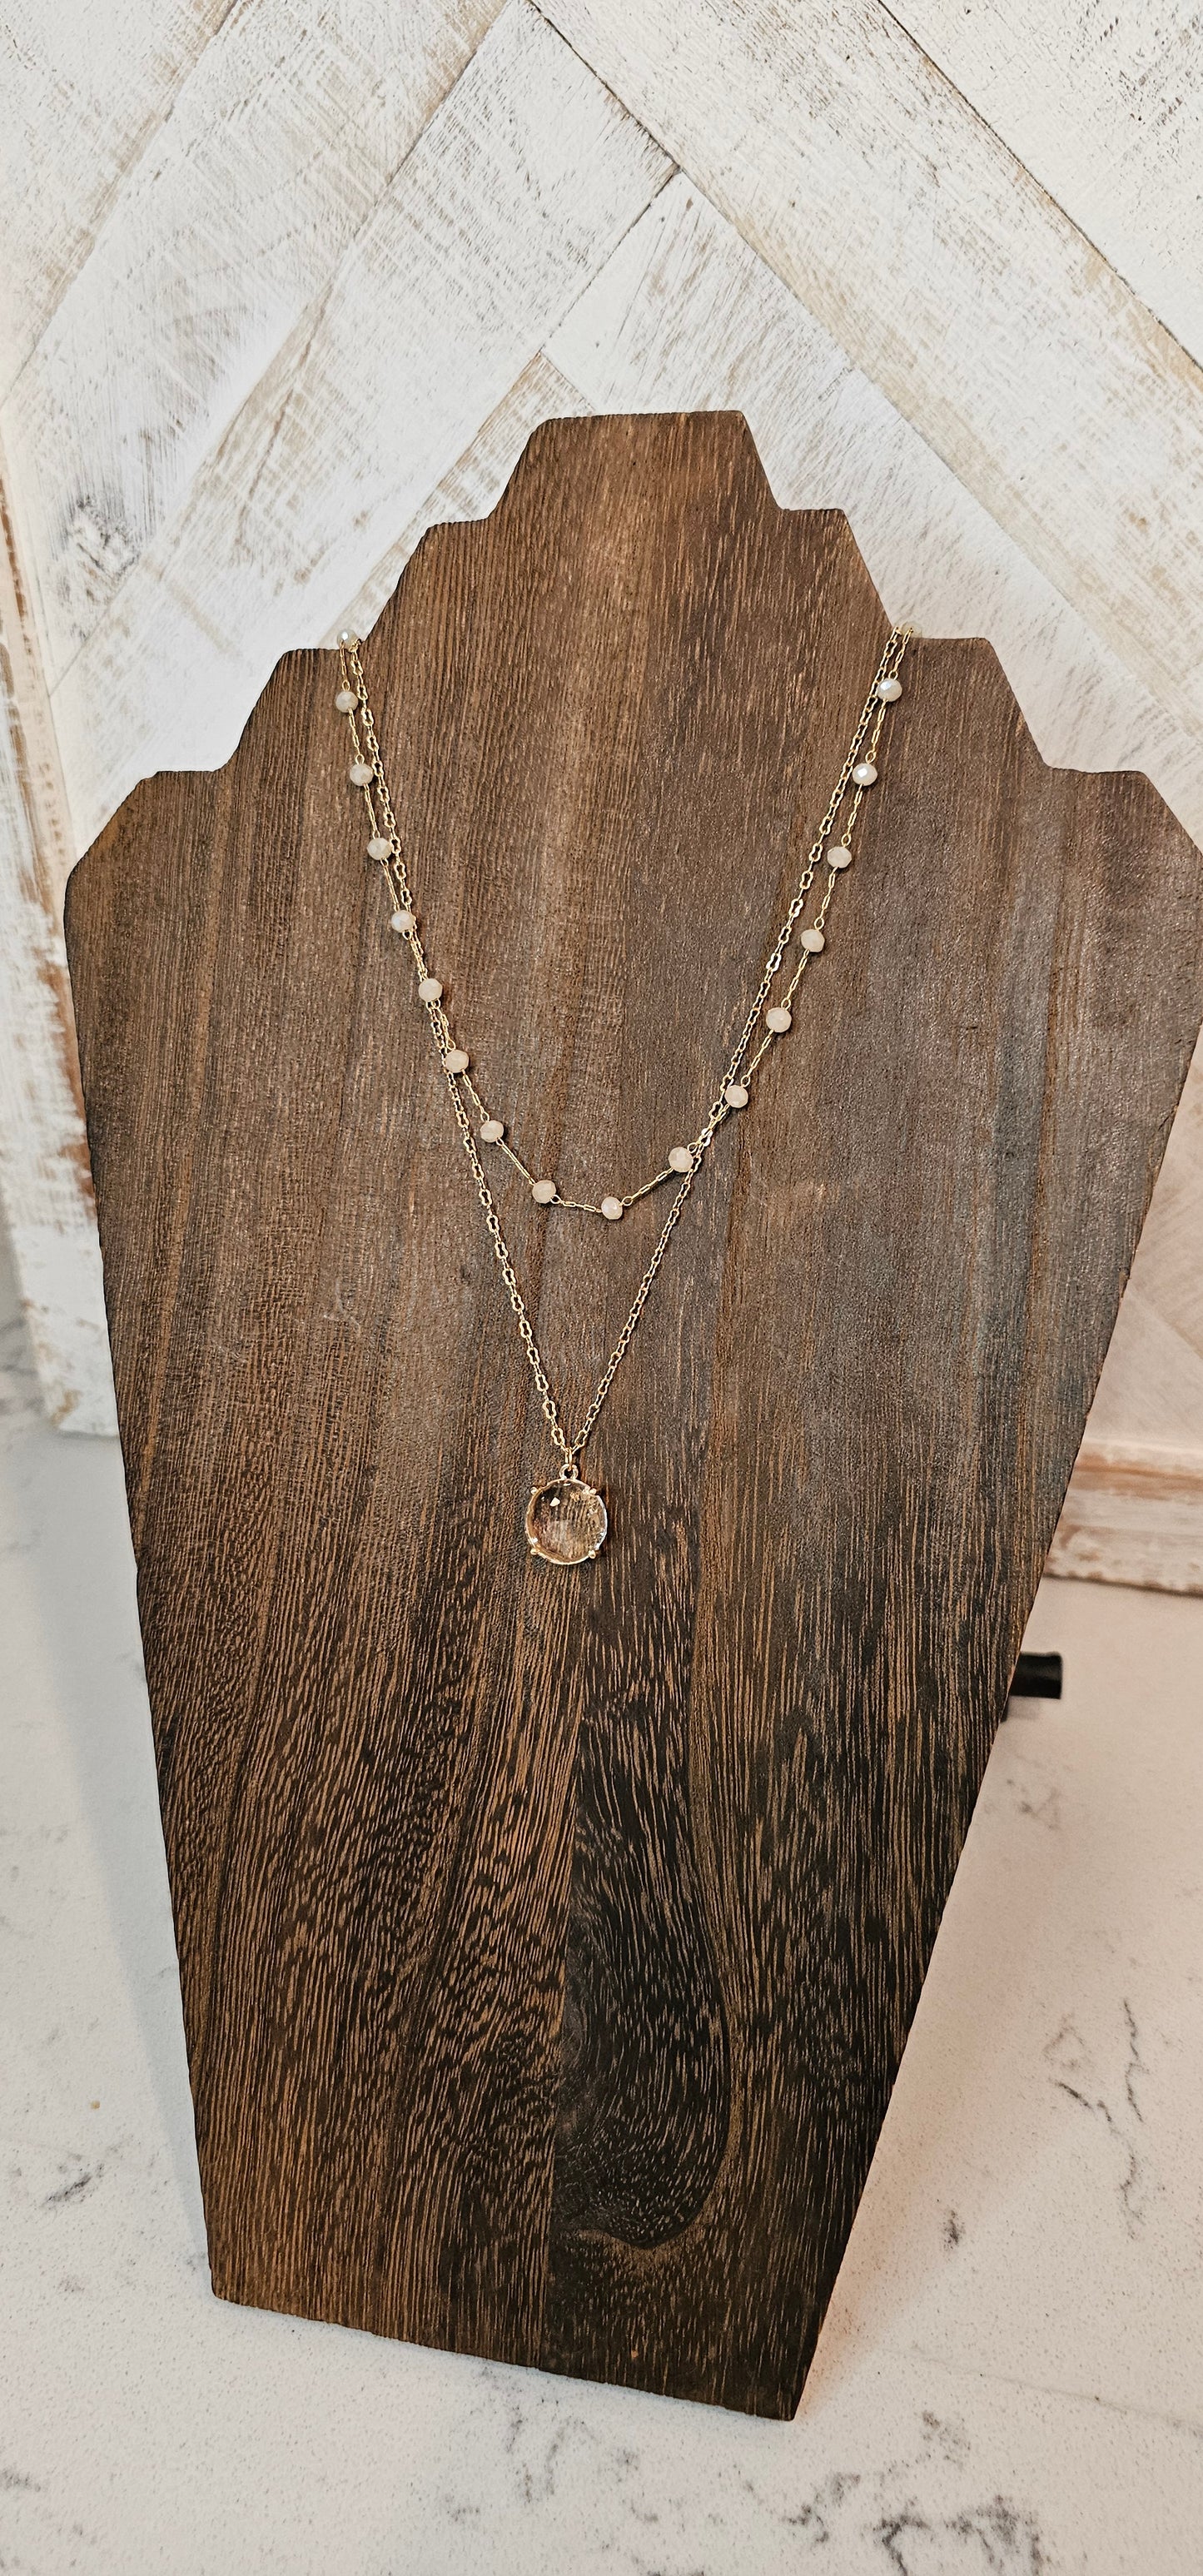 Adjustable chain Color: Gold link chains with ivory beads & clear crystal Limited supply!  